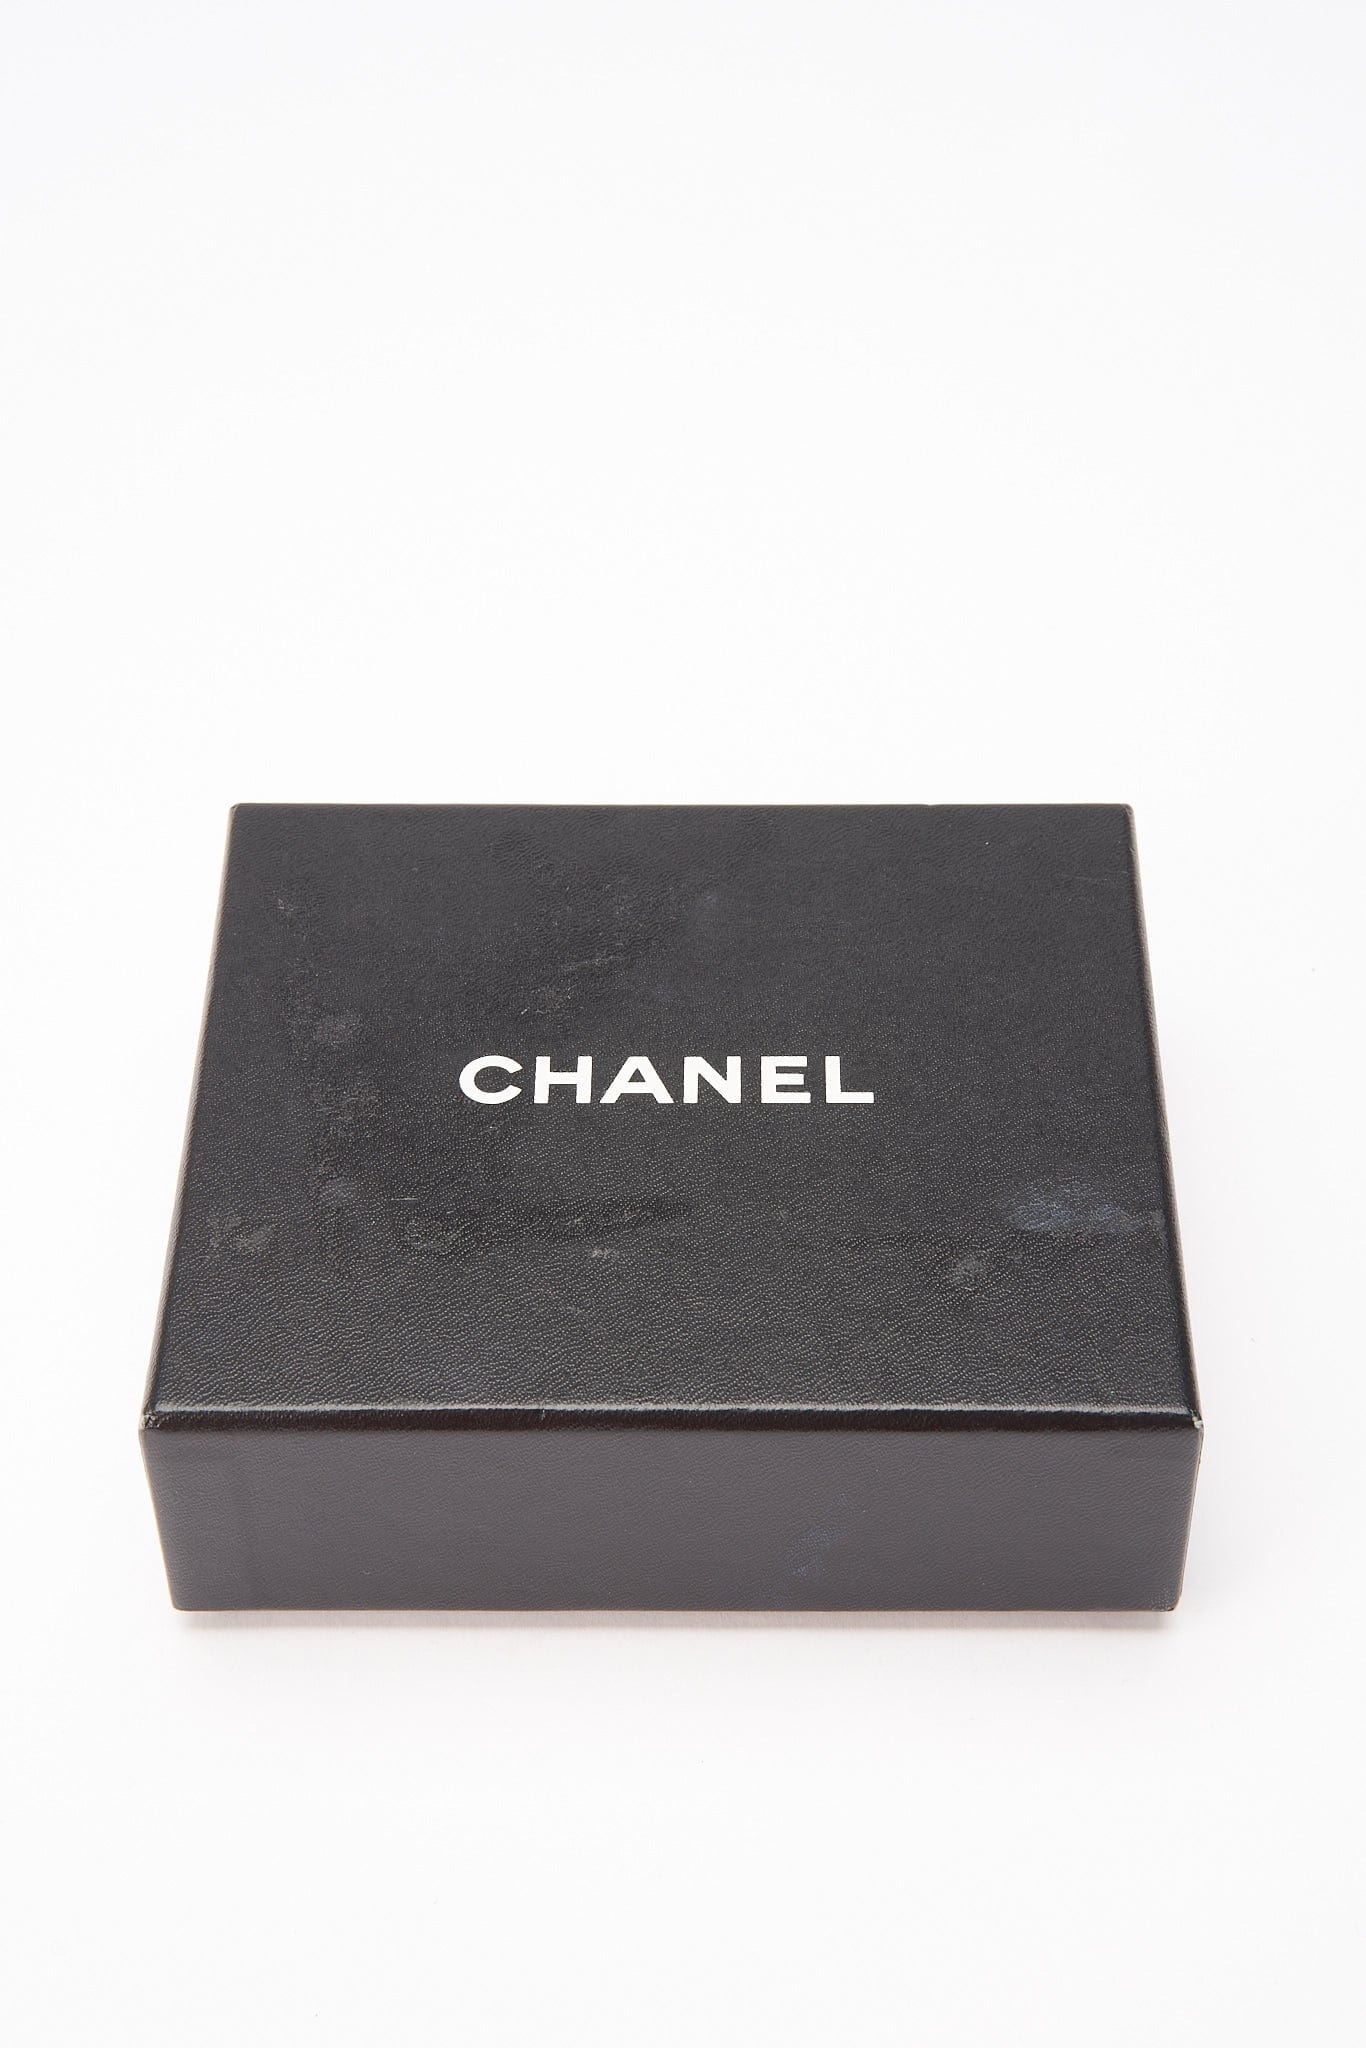 Chanel Peach Quilted Lambskin Vintage Wallet